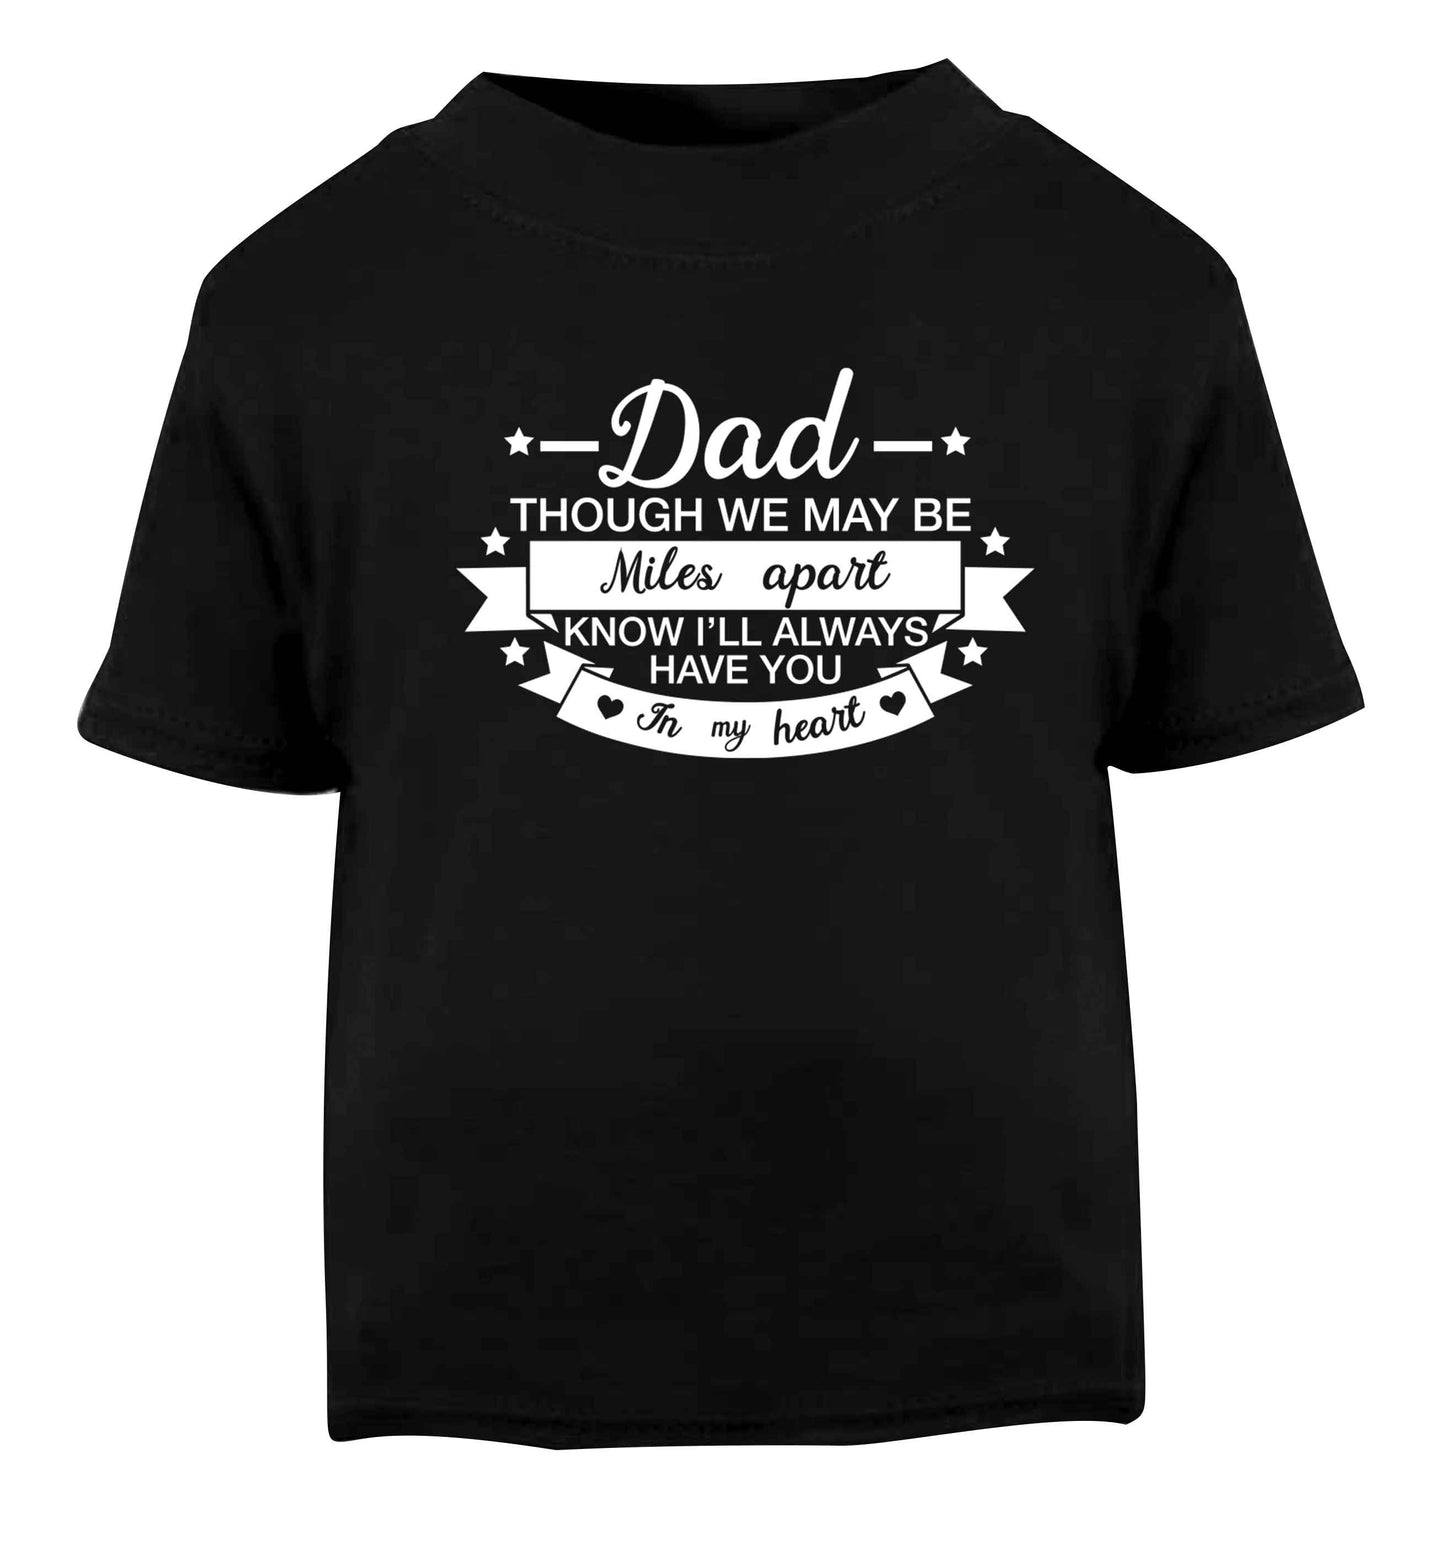 Dad though we are miles apart know I'll always have you in my heart Black baby toddler Tshirt 2 years